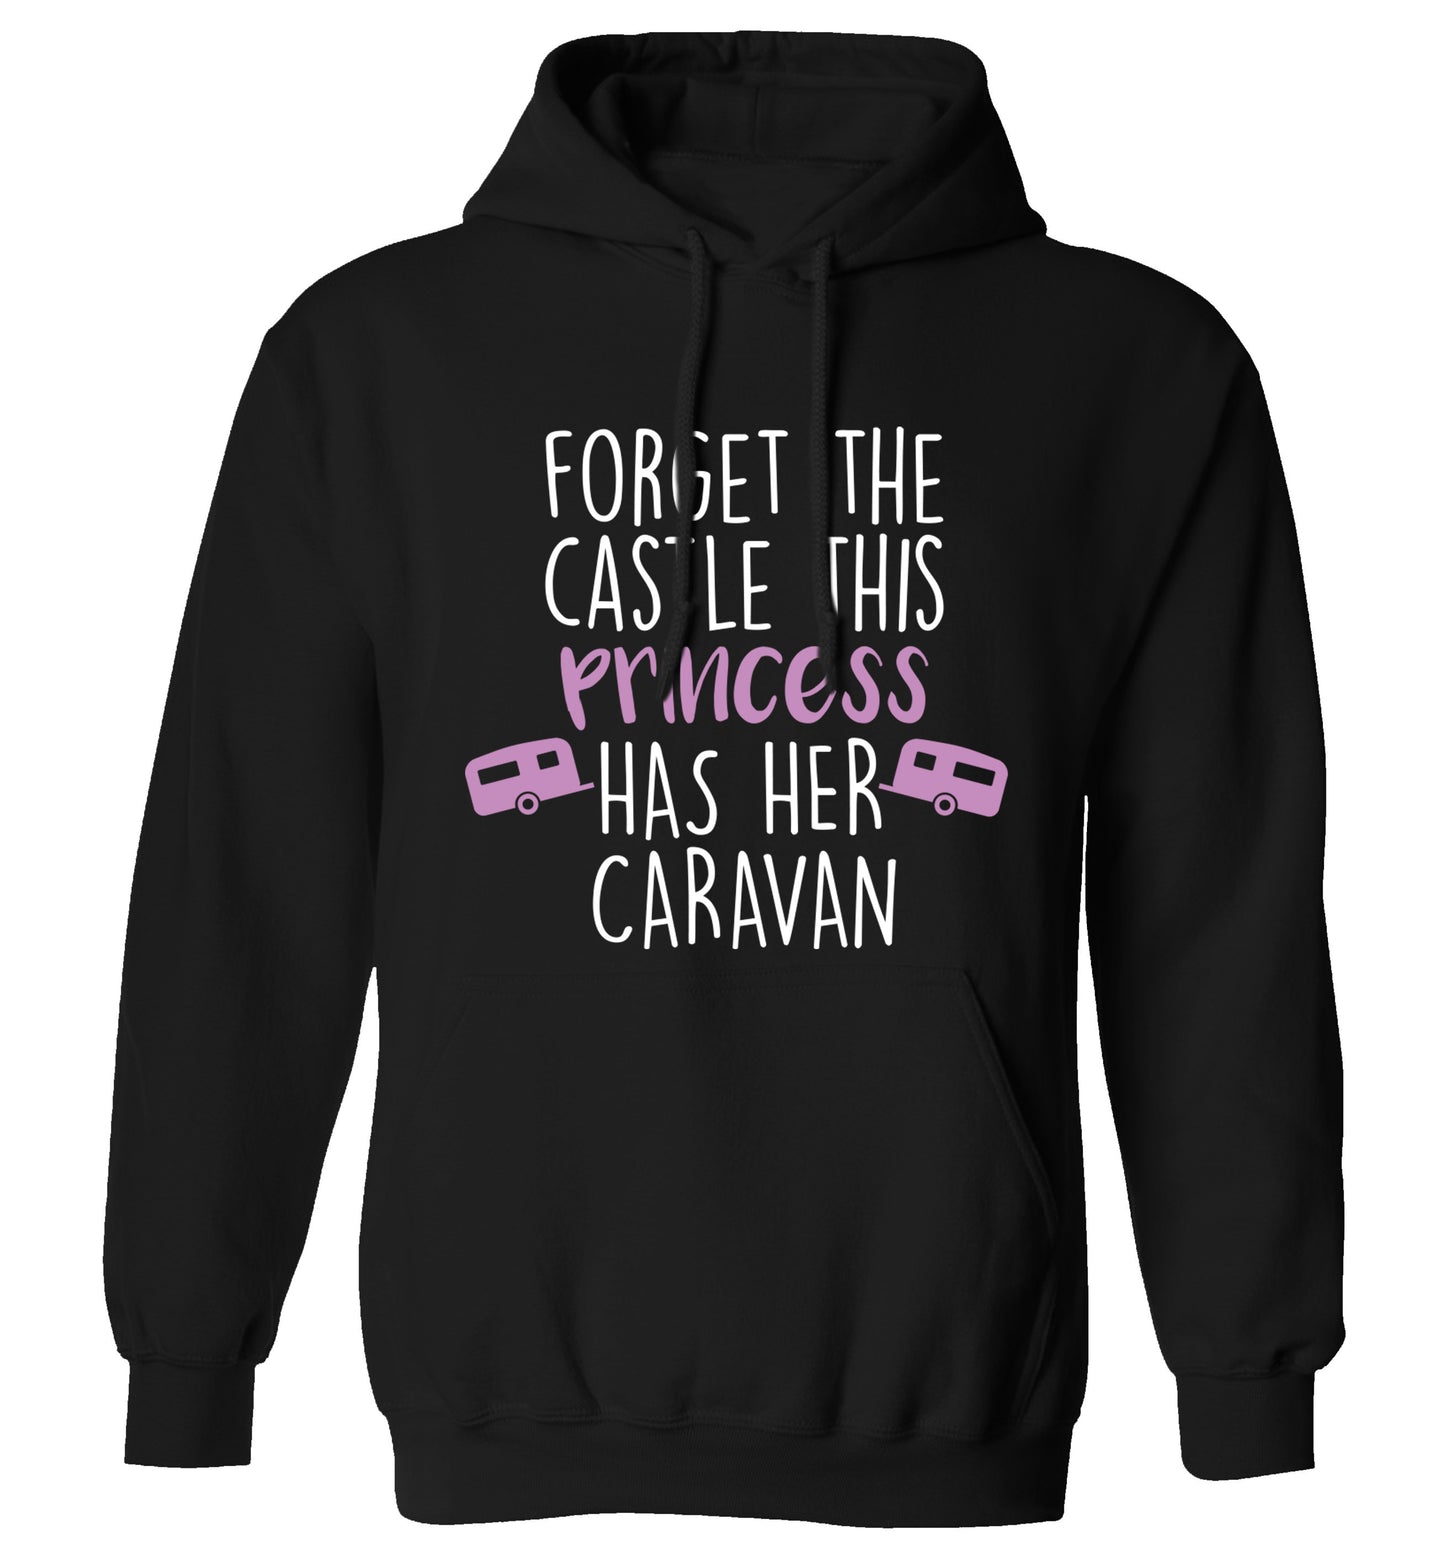 Forget the castle this princess lives at the caravan adults unisex black hoodie 2XL